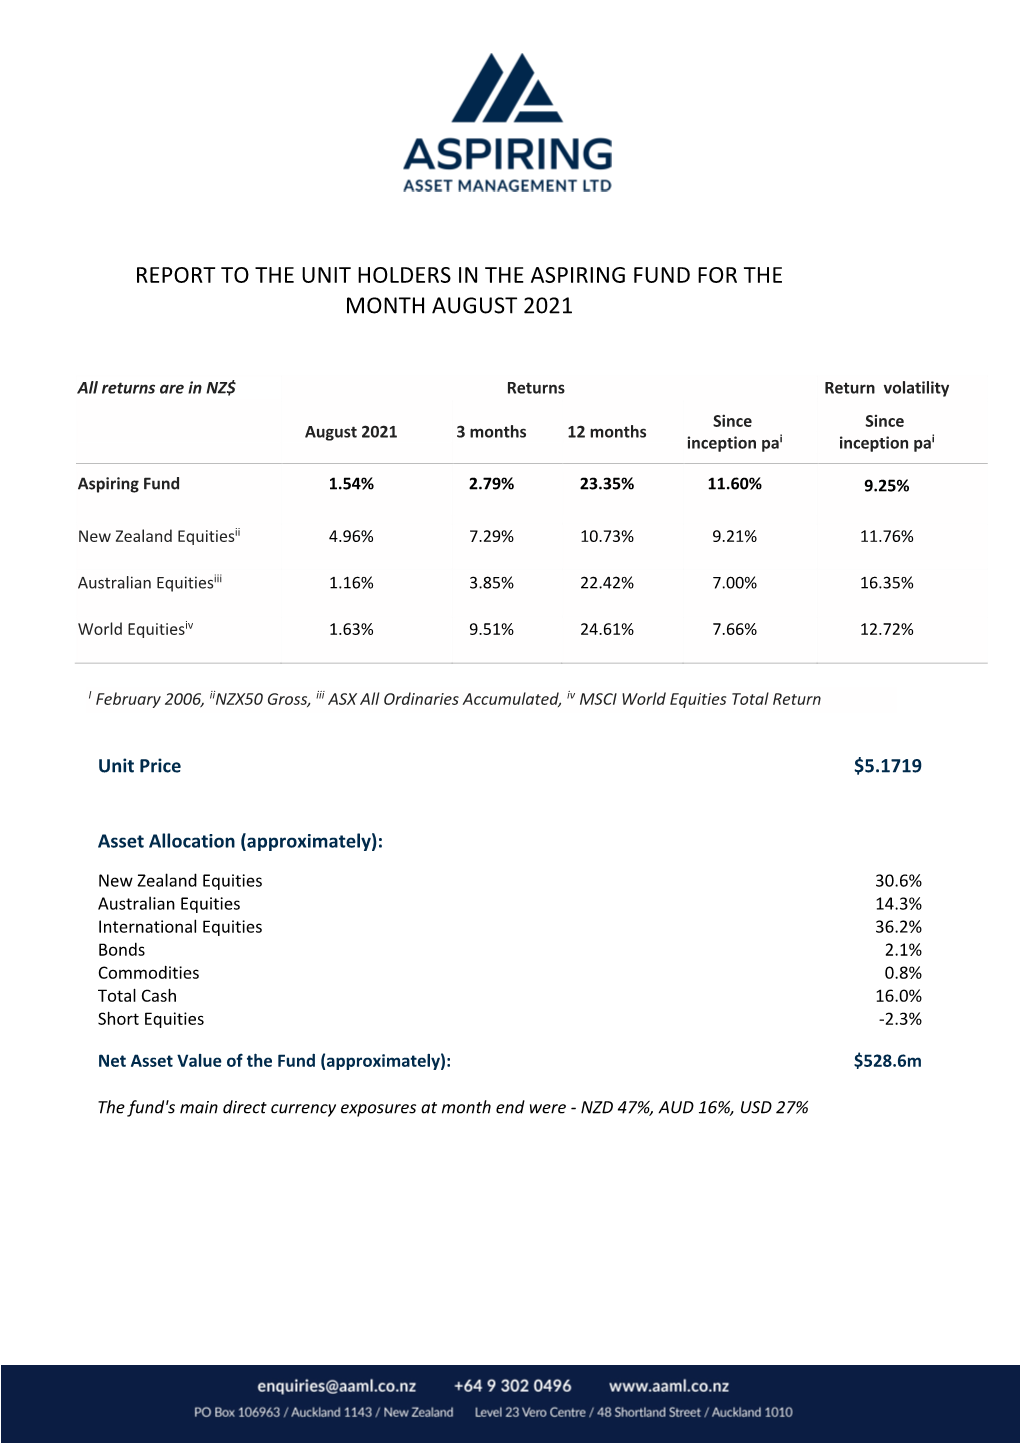 Report to the Unit Holders in the Aspiring Fund for the Month August 2021